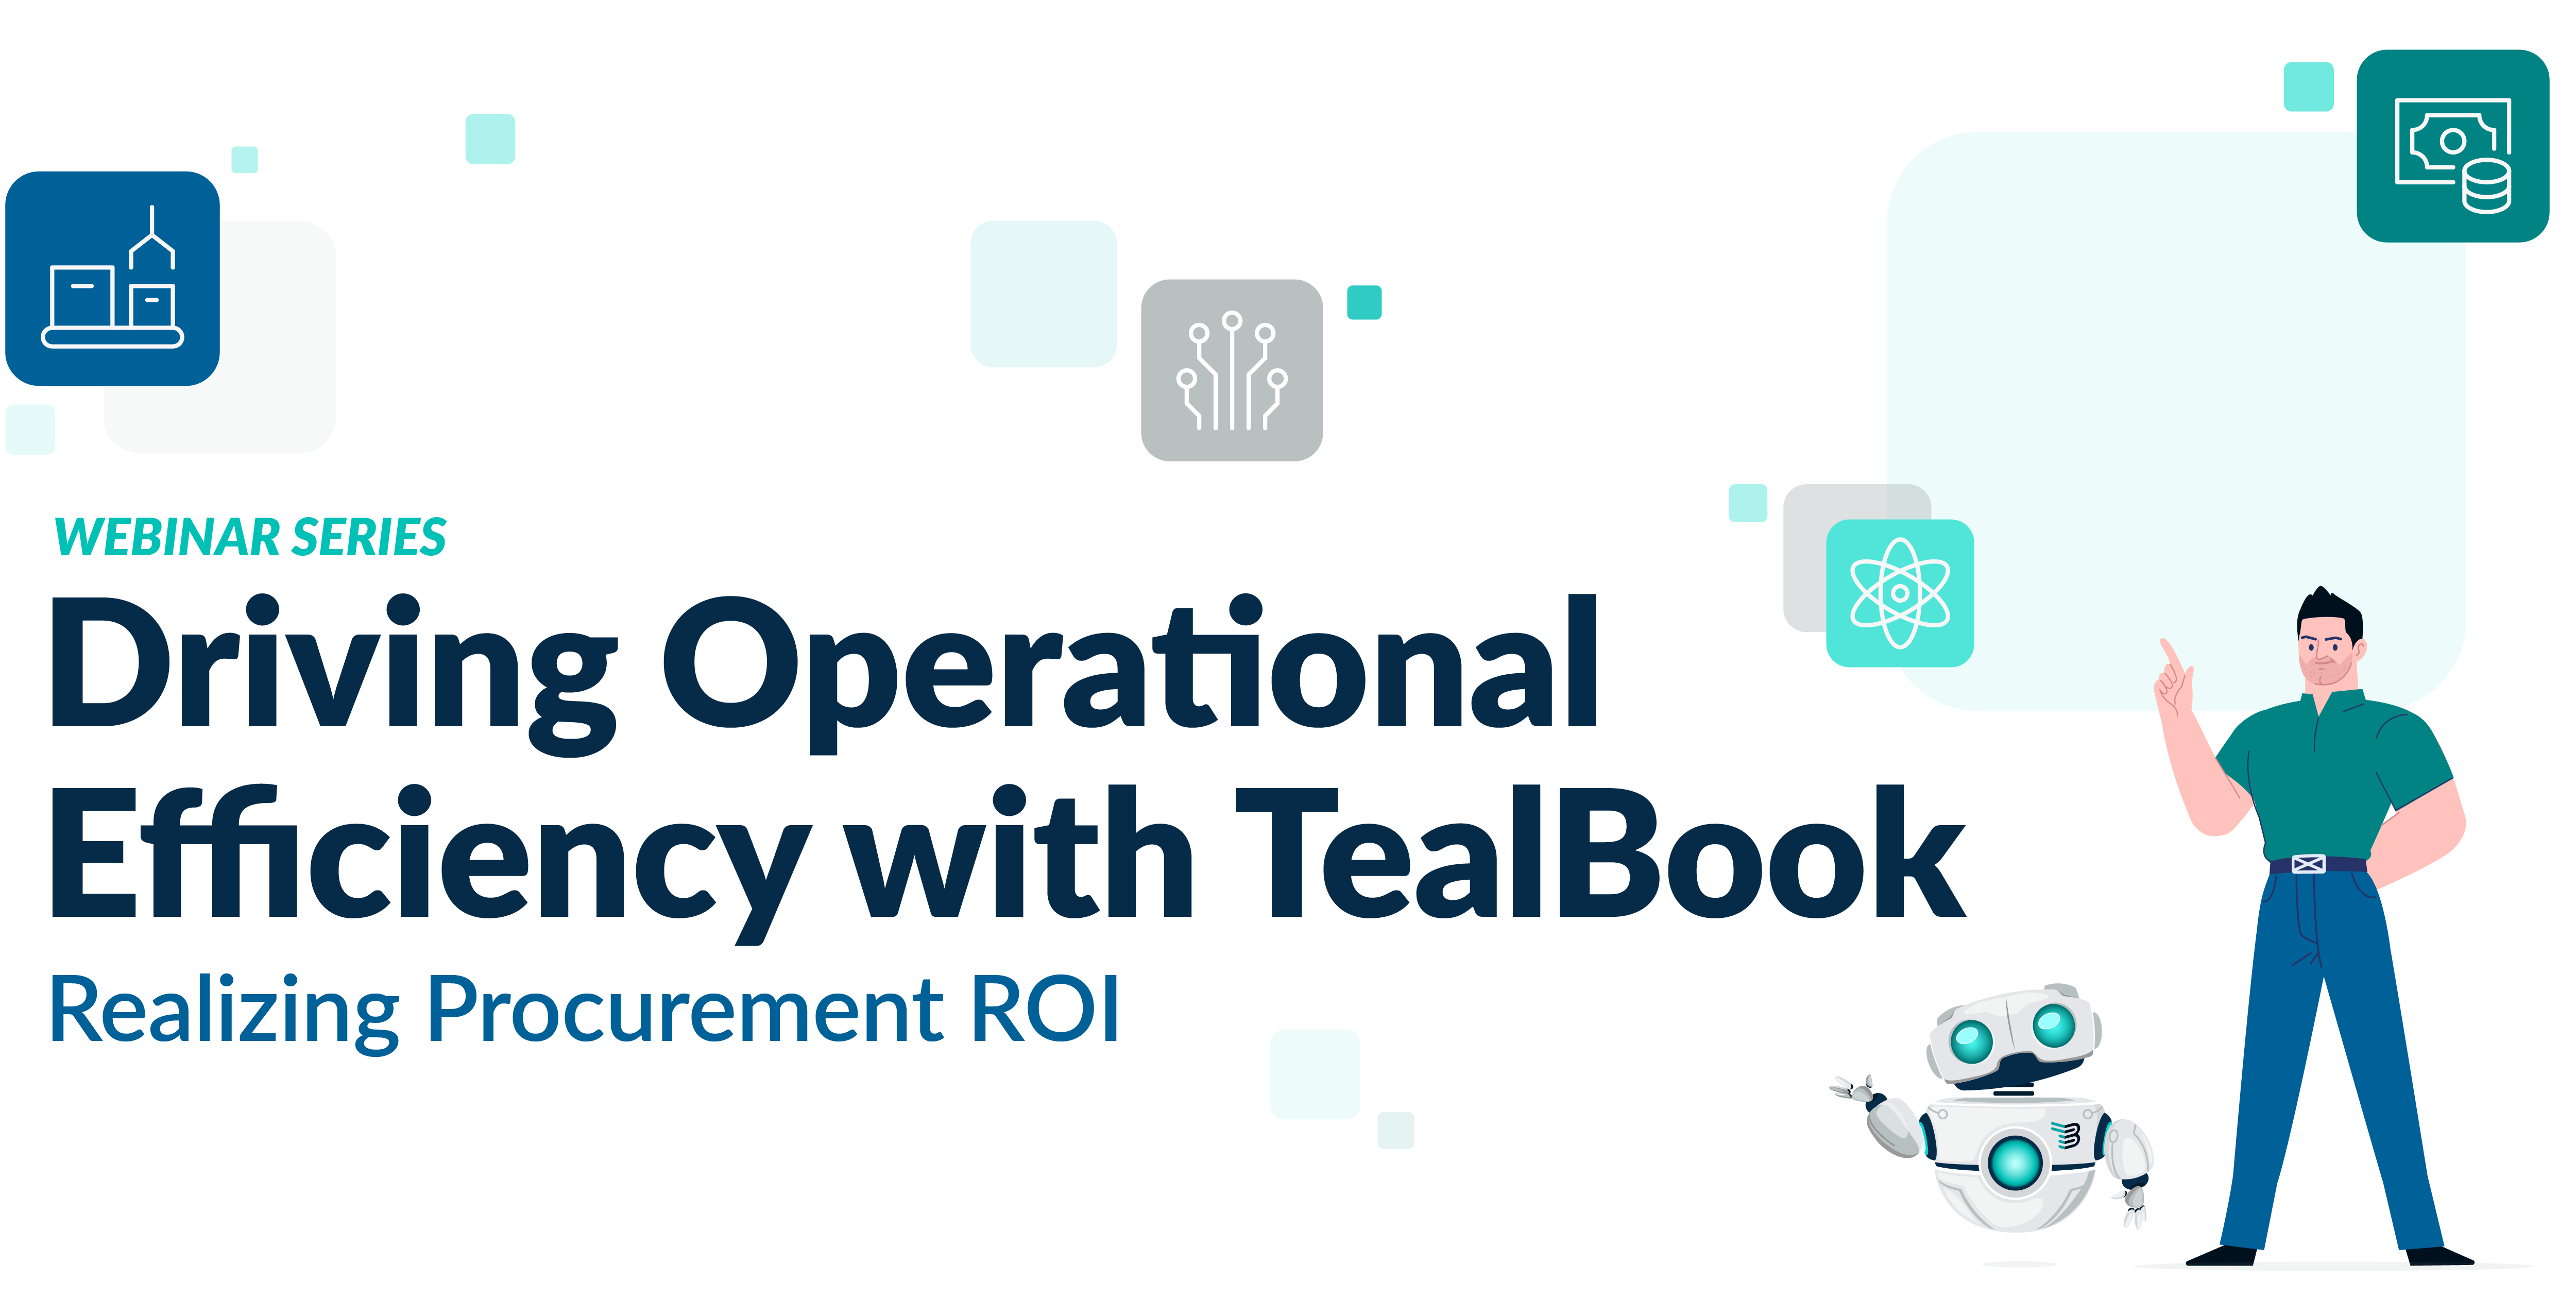 Driving Operational Efficiency with TealBook